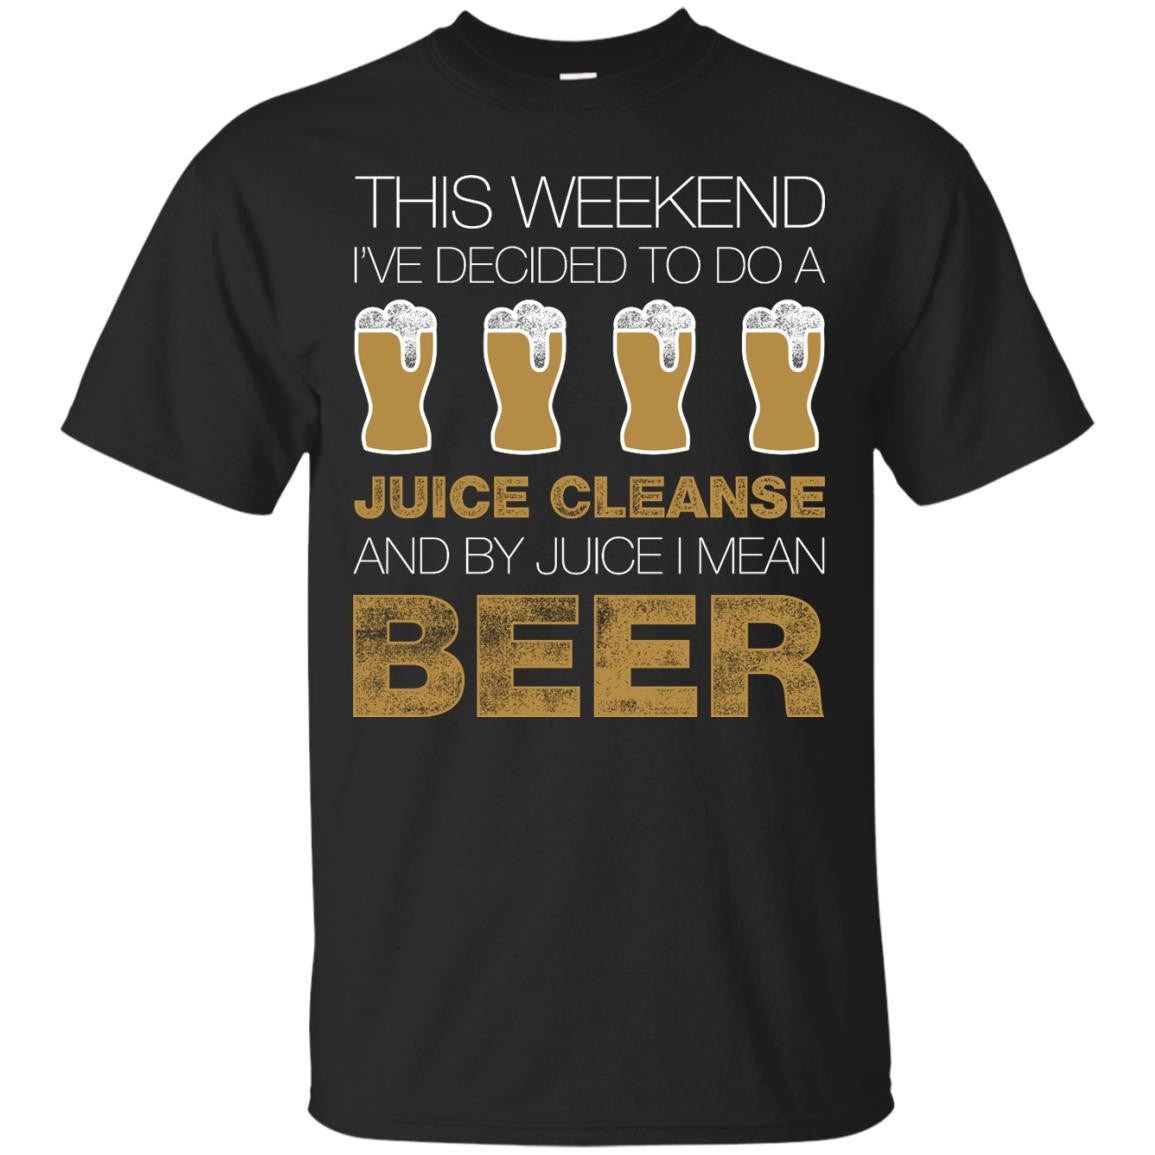 This Weekend I've Decided To Do A Juice Cleanse And By Juice I Mean Beer T-Shirt Apparel - The Beer Lodge